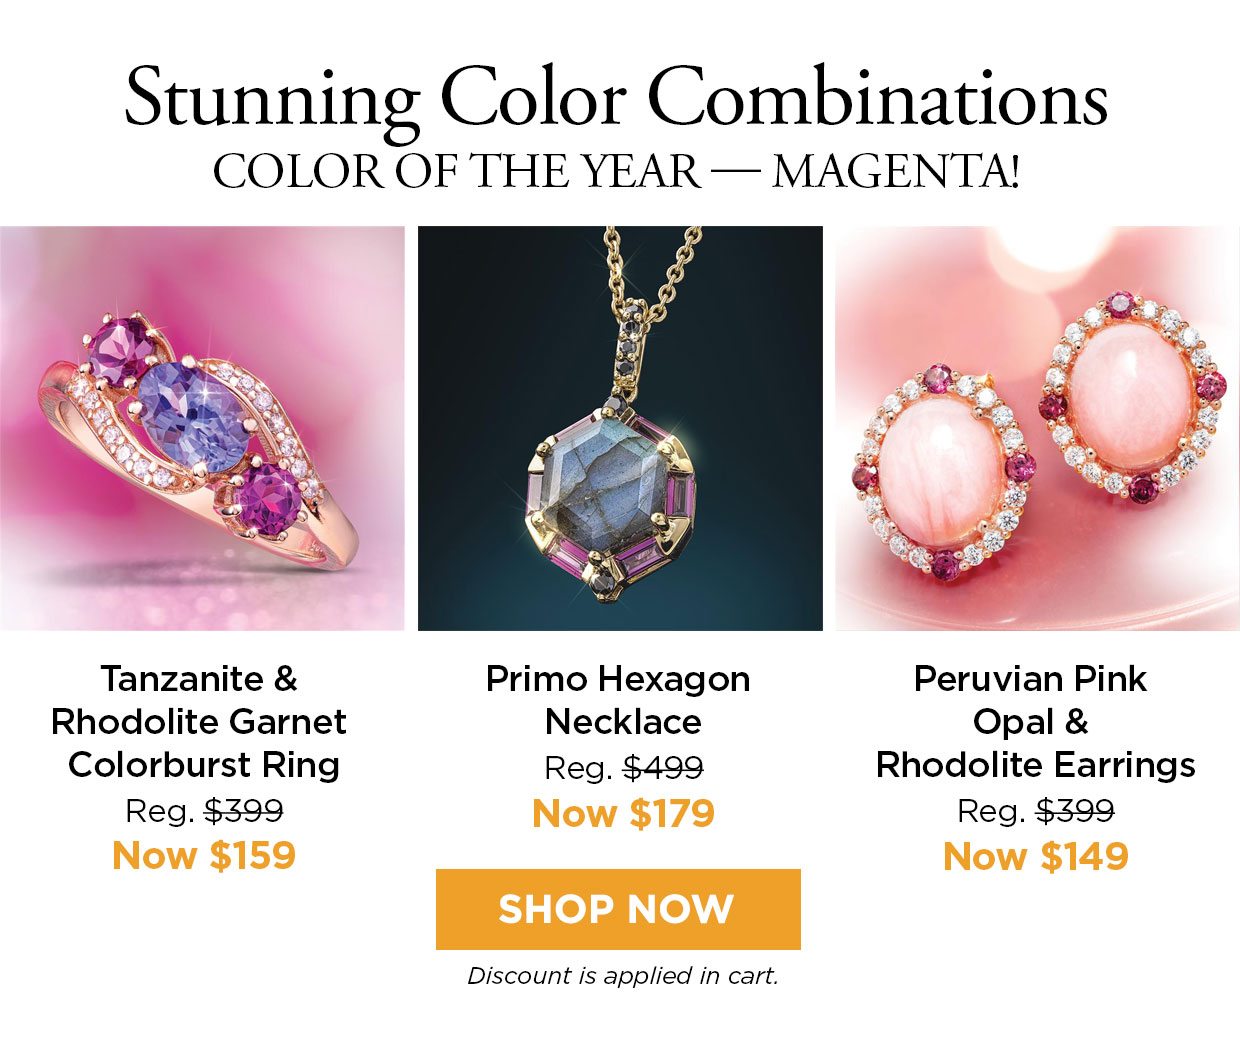 Stunning Color Combinations COLOR OF THE YEAR - MAGENTA! Tanzanite & Rhodolite Garnet Colorburst Ring Reg. $399, Now $159. Primo Hexagon Necklace Reg. $499, Now $179. Peruvian Pink Opal & Rhodolite Earrings Reg. $399, Now $149. Shop Now button. Discount applied in cart.